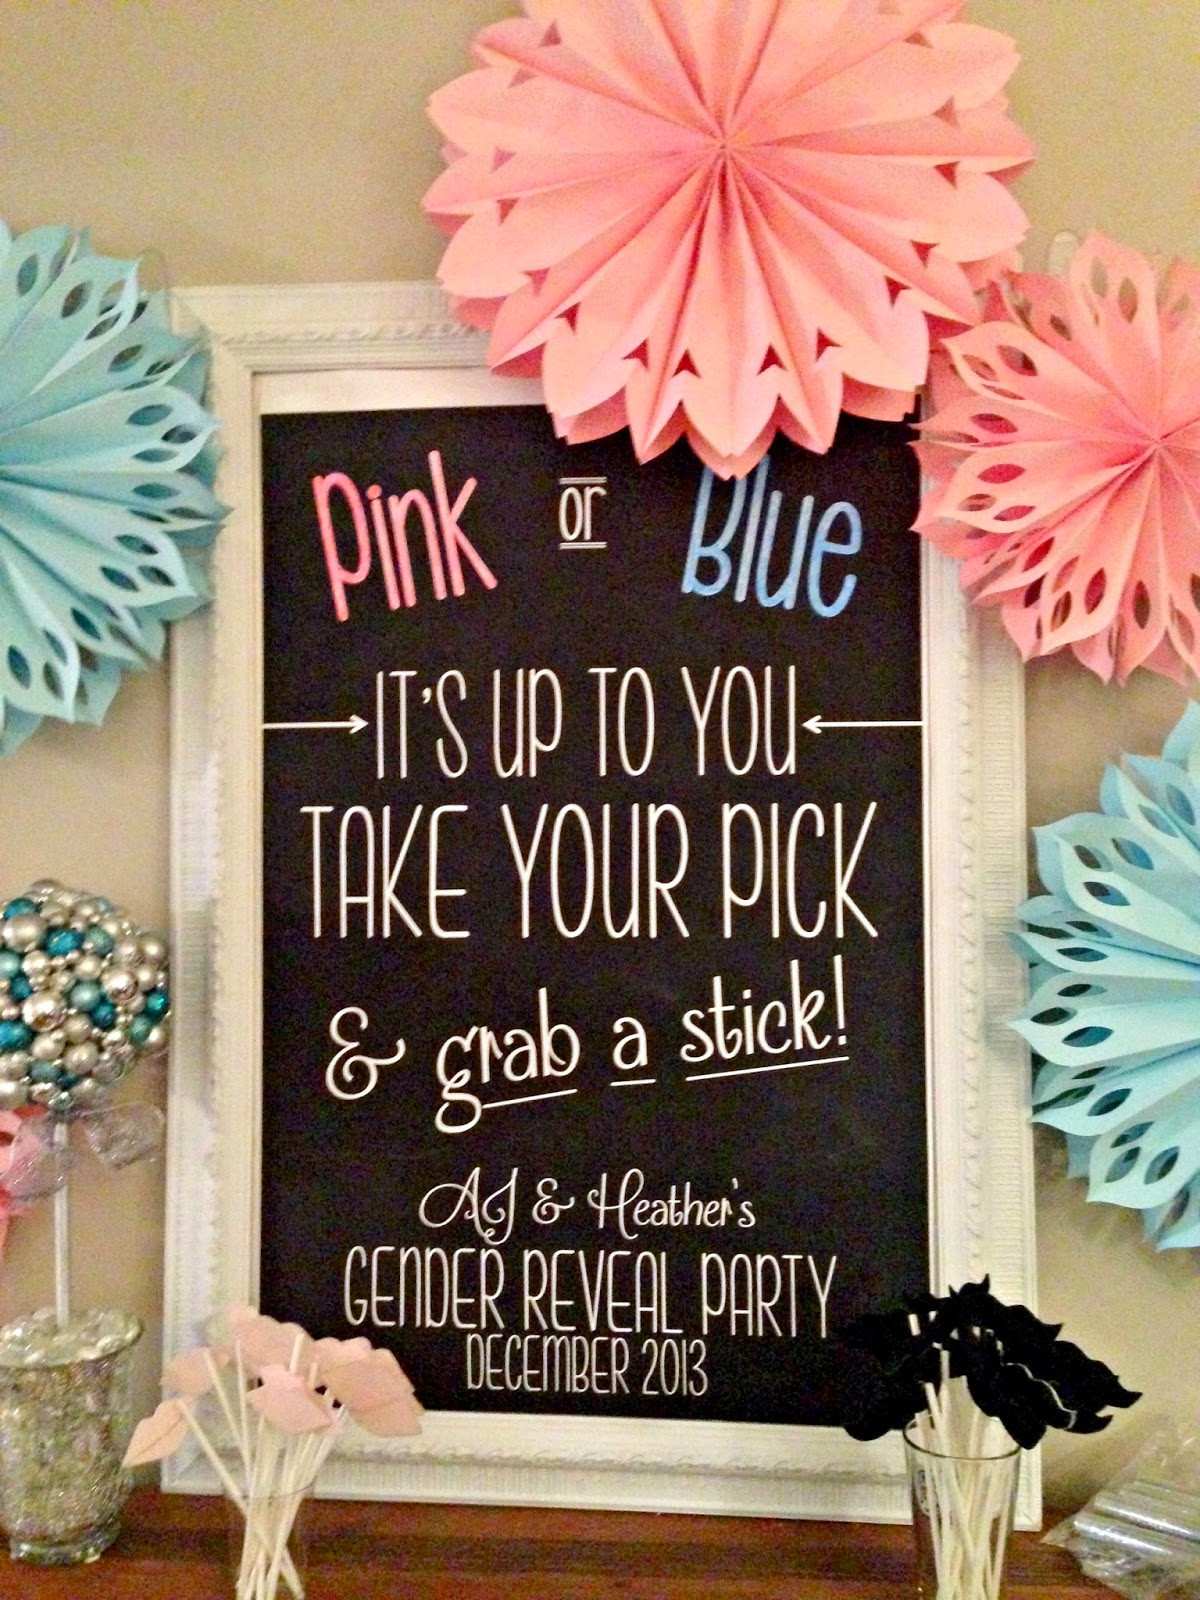 Cute Ideas For Baby Gender Reveal Party
 It s a pretty Prins life Gender Reveal Party